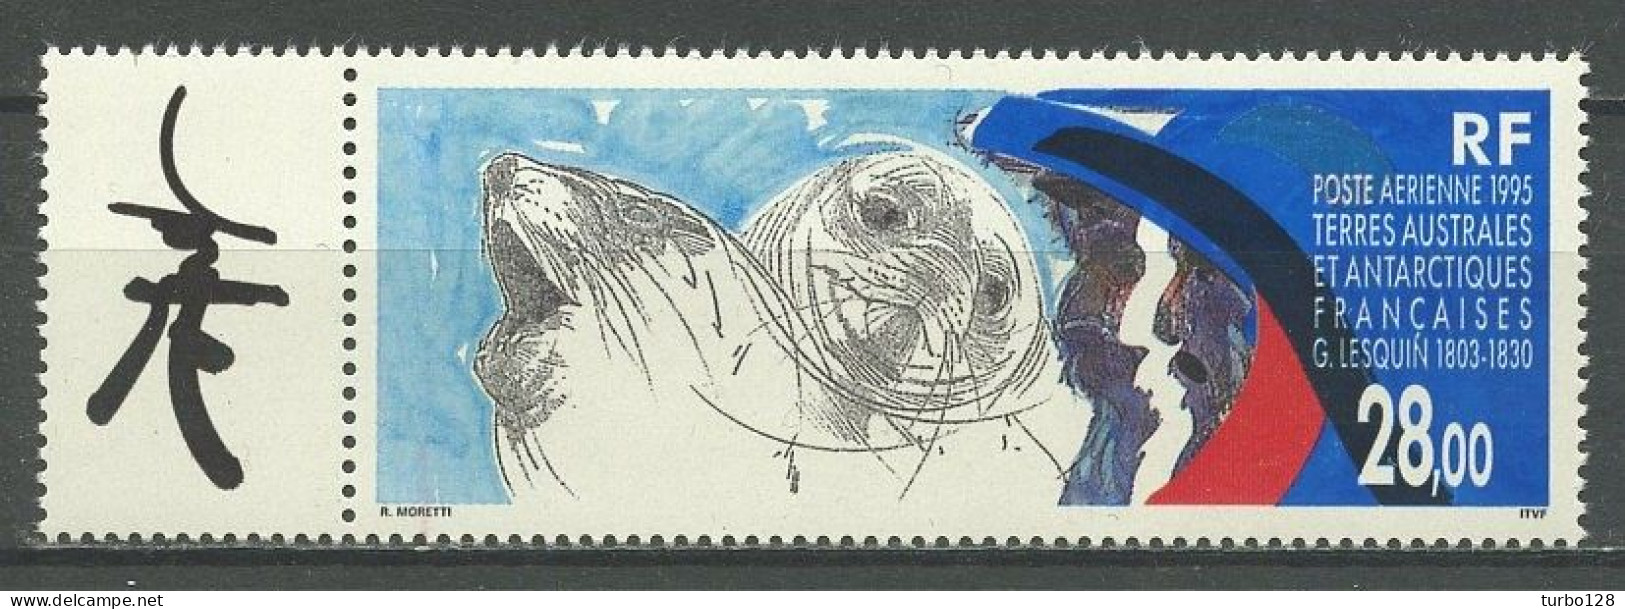 TAAF 1995 PA N° 136 ** Neuf MNH Superbe C 14,20 € Faune Animaux Animals - G. Lesquin Phoques - Poste Aérienne